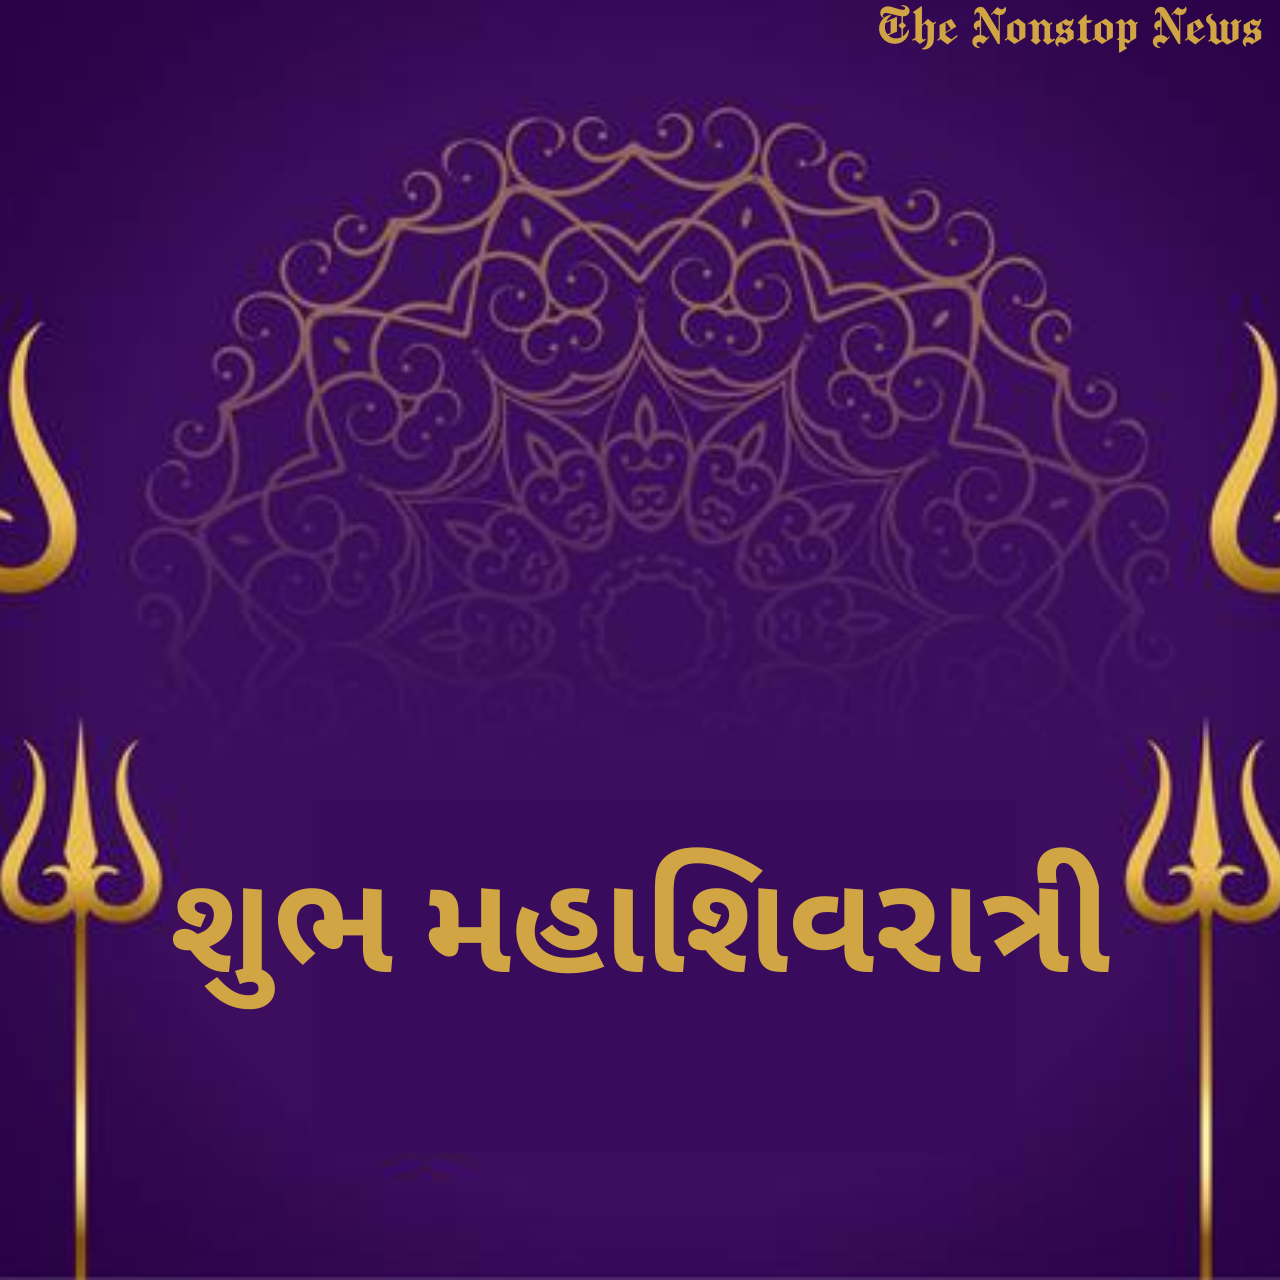 Maha Shivratri 2021 Wishes in Gujarati Quotes, Messages, Greetings, and HD Images to Share